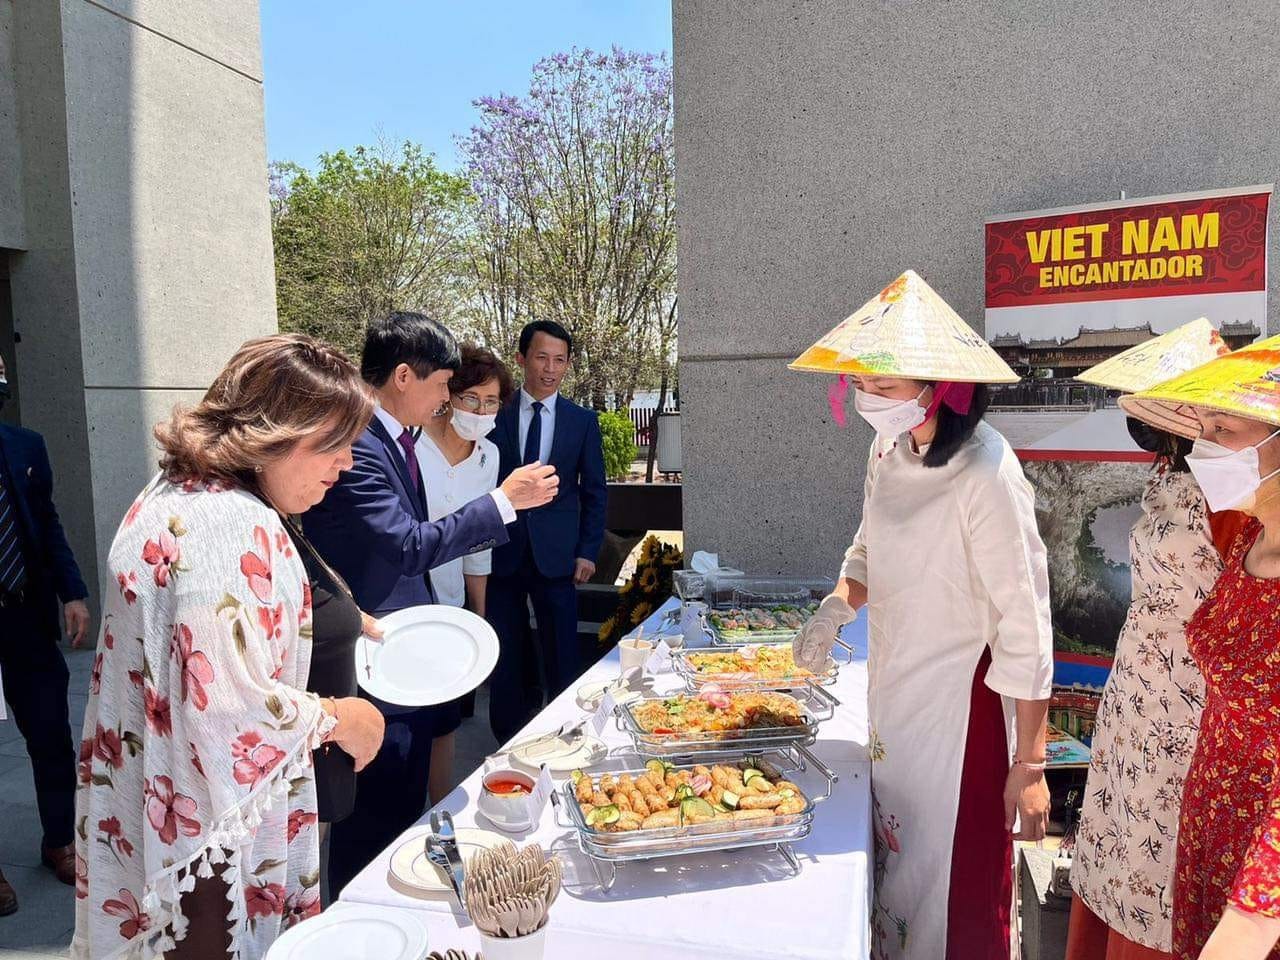 Vietnamese cuisine introduced to Mexican parliamentarians. Source: Vietnamese Embassy in Mexico